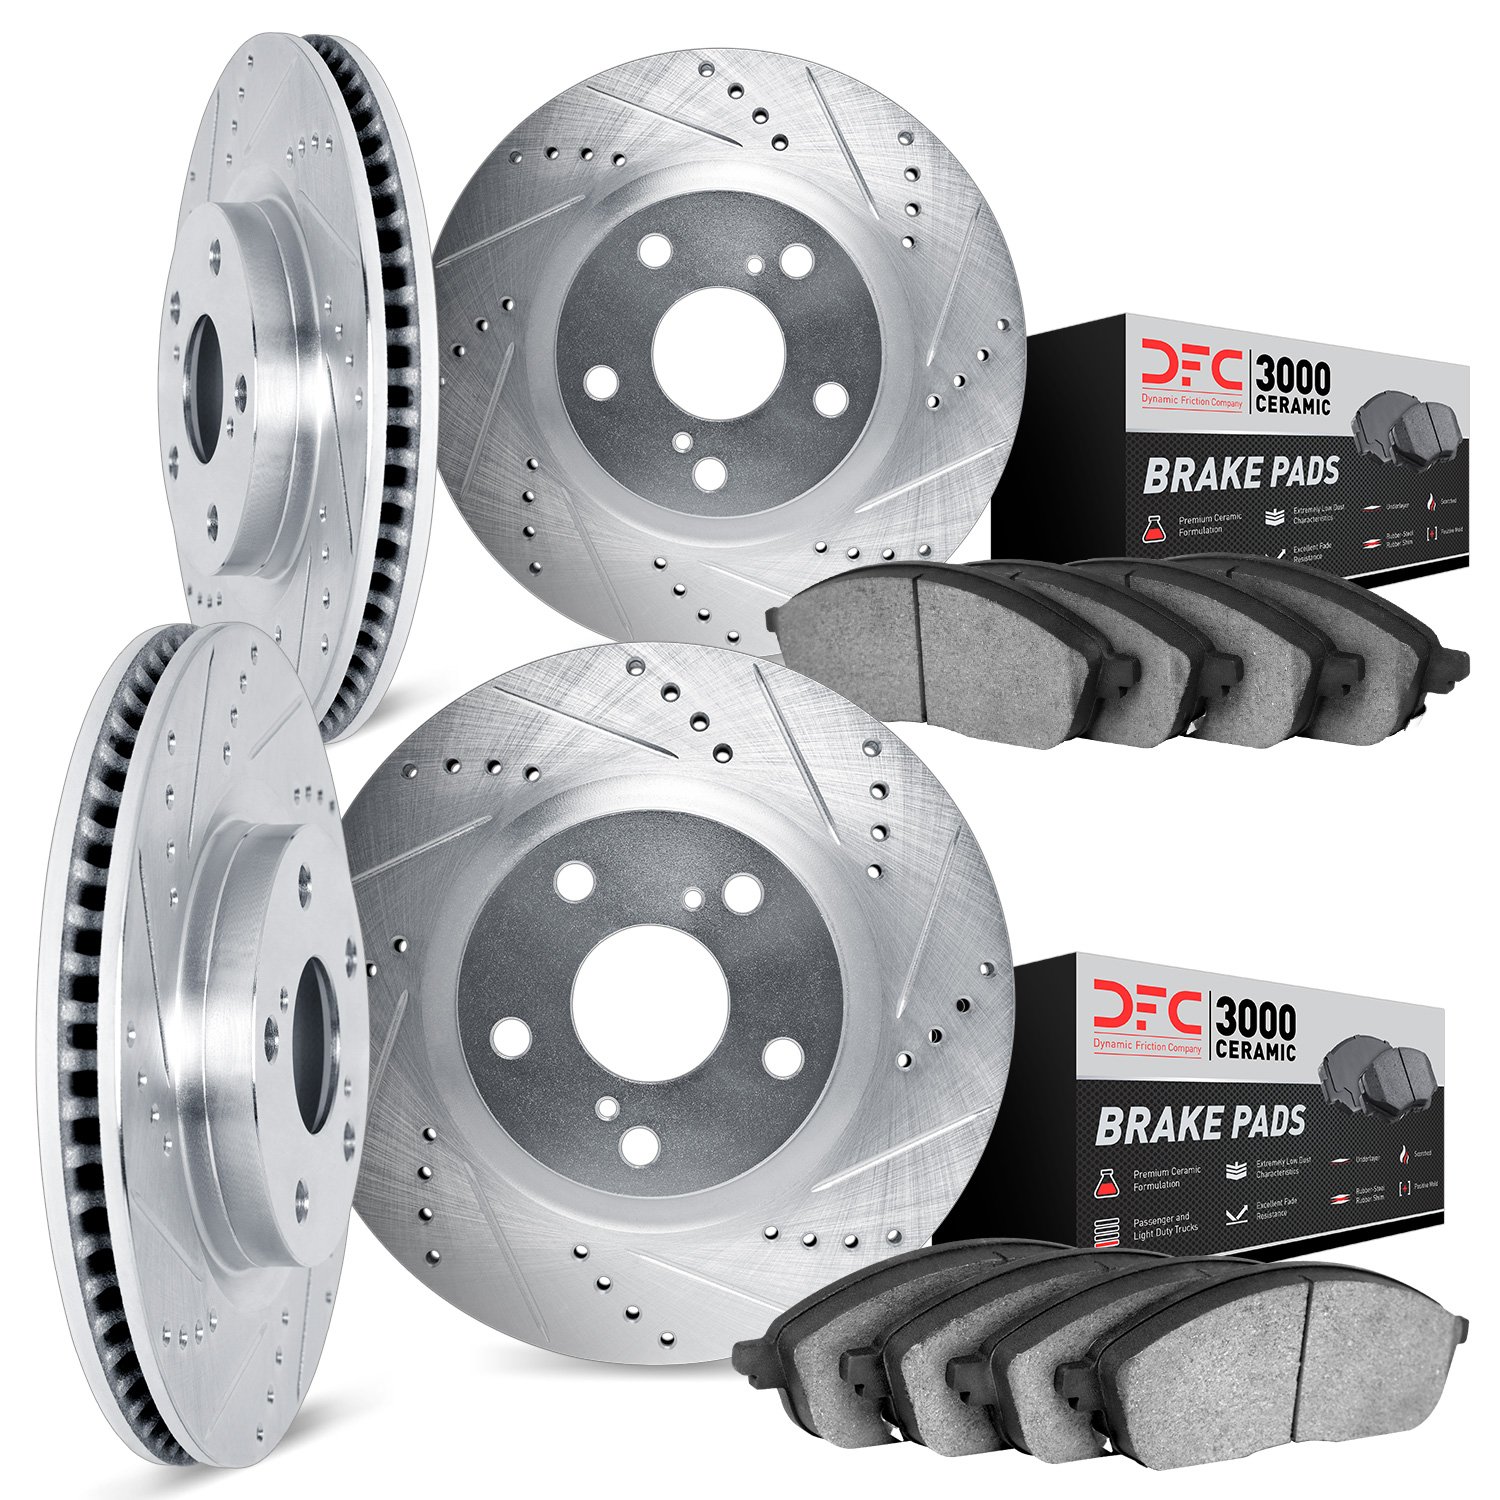 7304-55001 Drilled/Slotted Brake Rotor with 3000-Series Ceramic Brake Pads Kit [Silver], 1991-1992 Ford/Lincoln/Mercury/Mazda, P